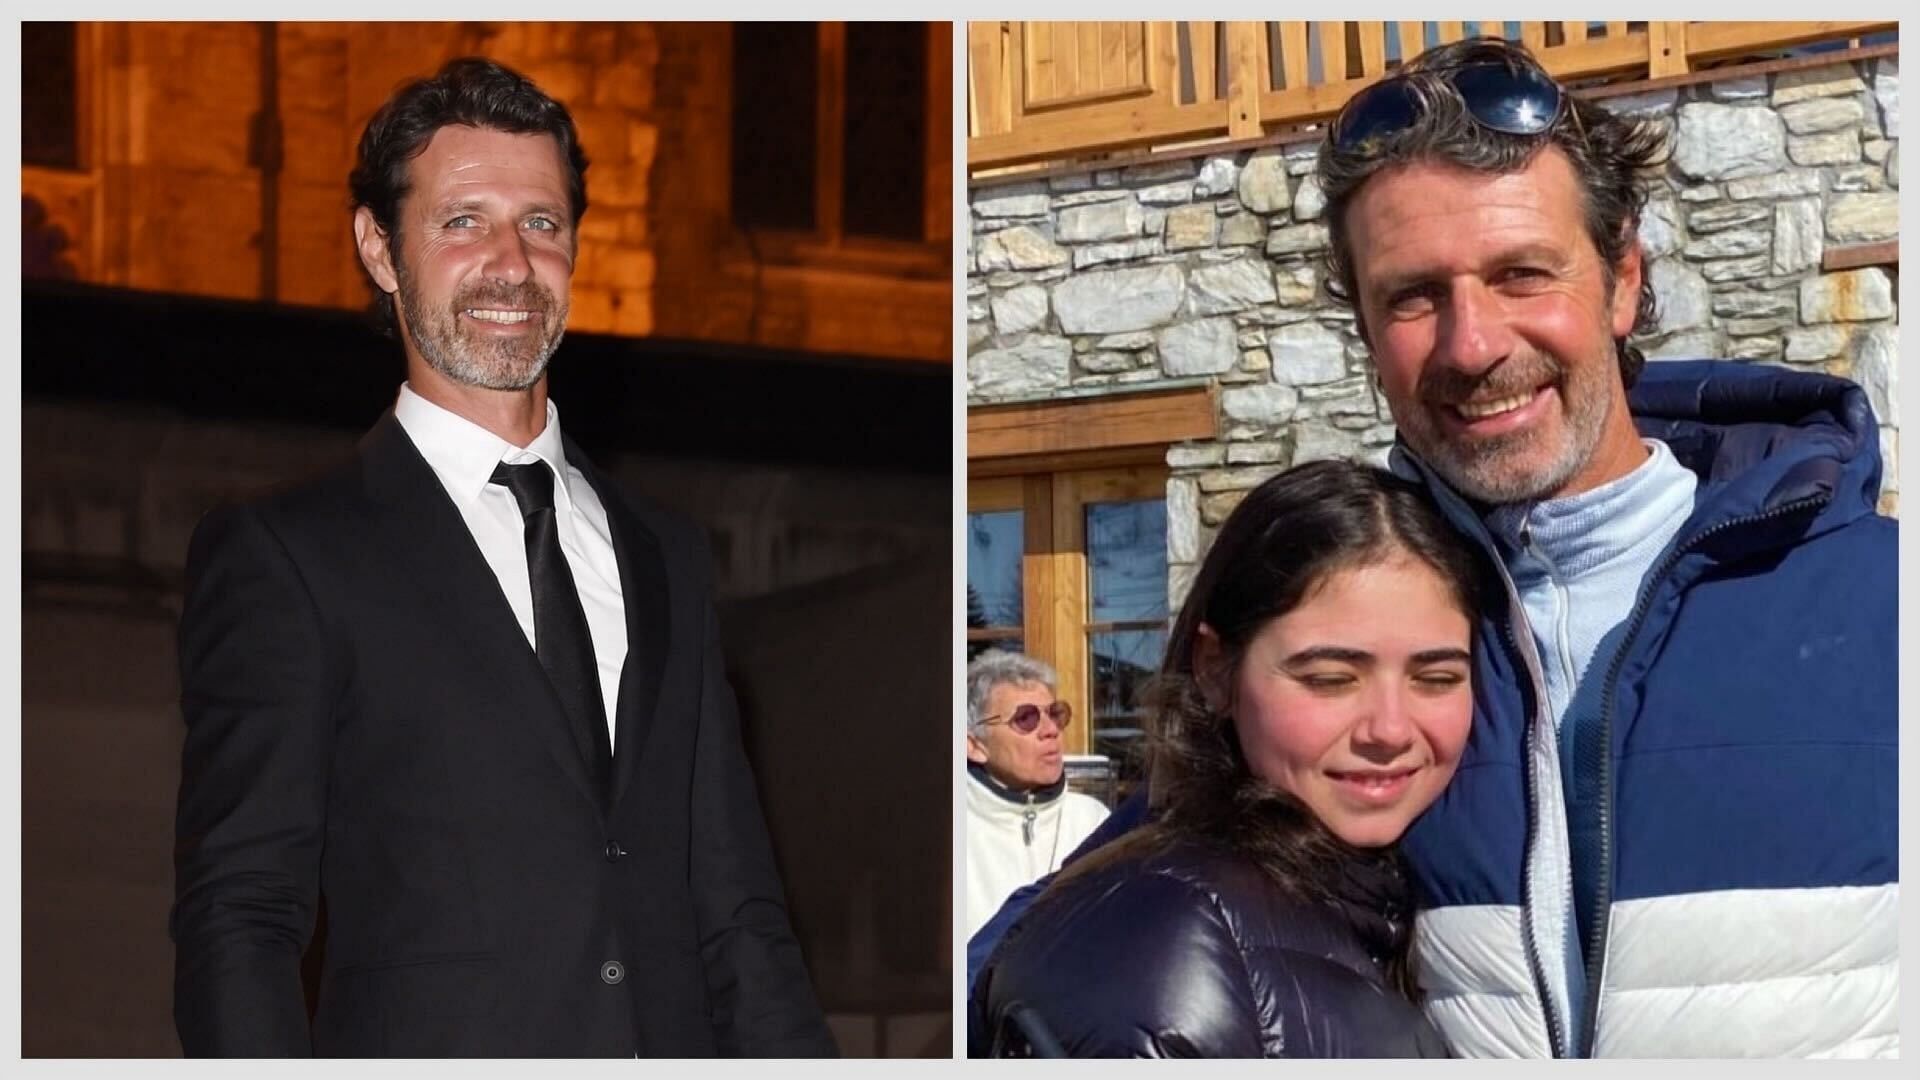 Patrick Mouratoglou and his daughter Juliette